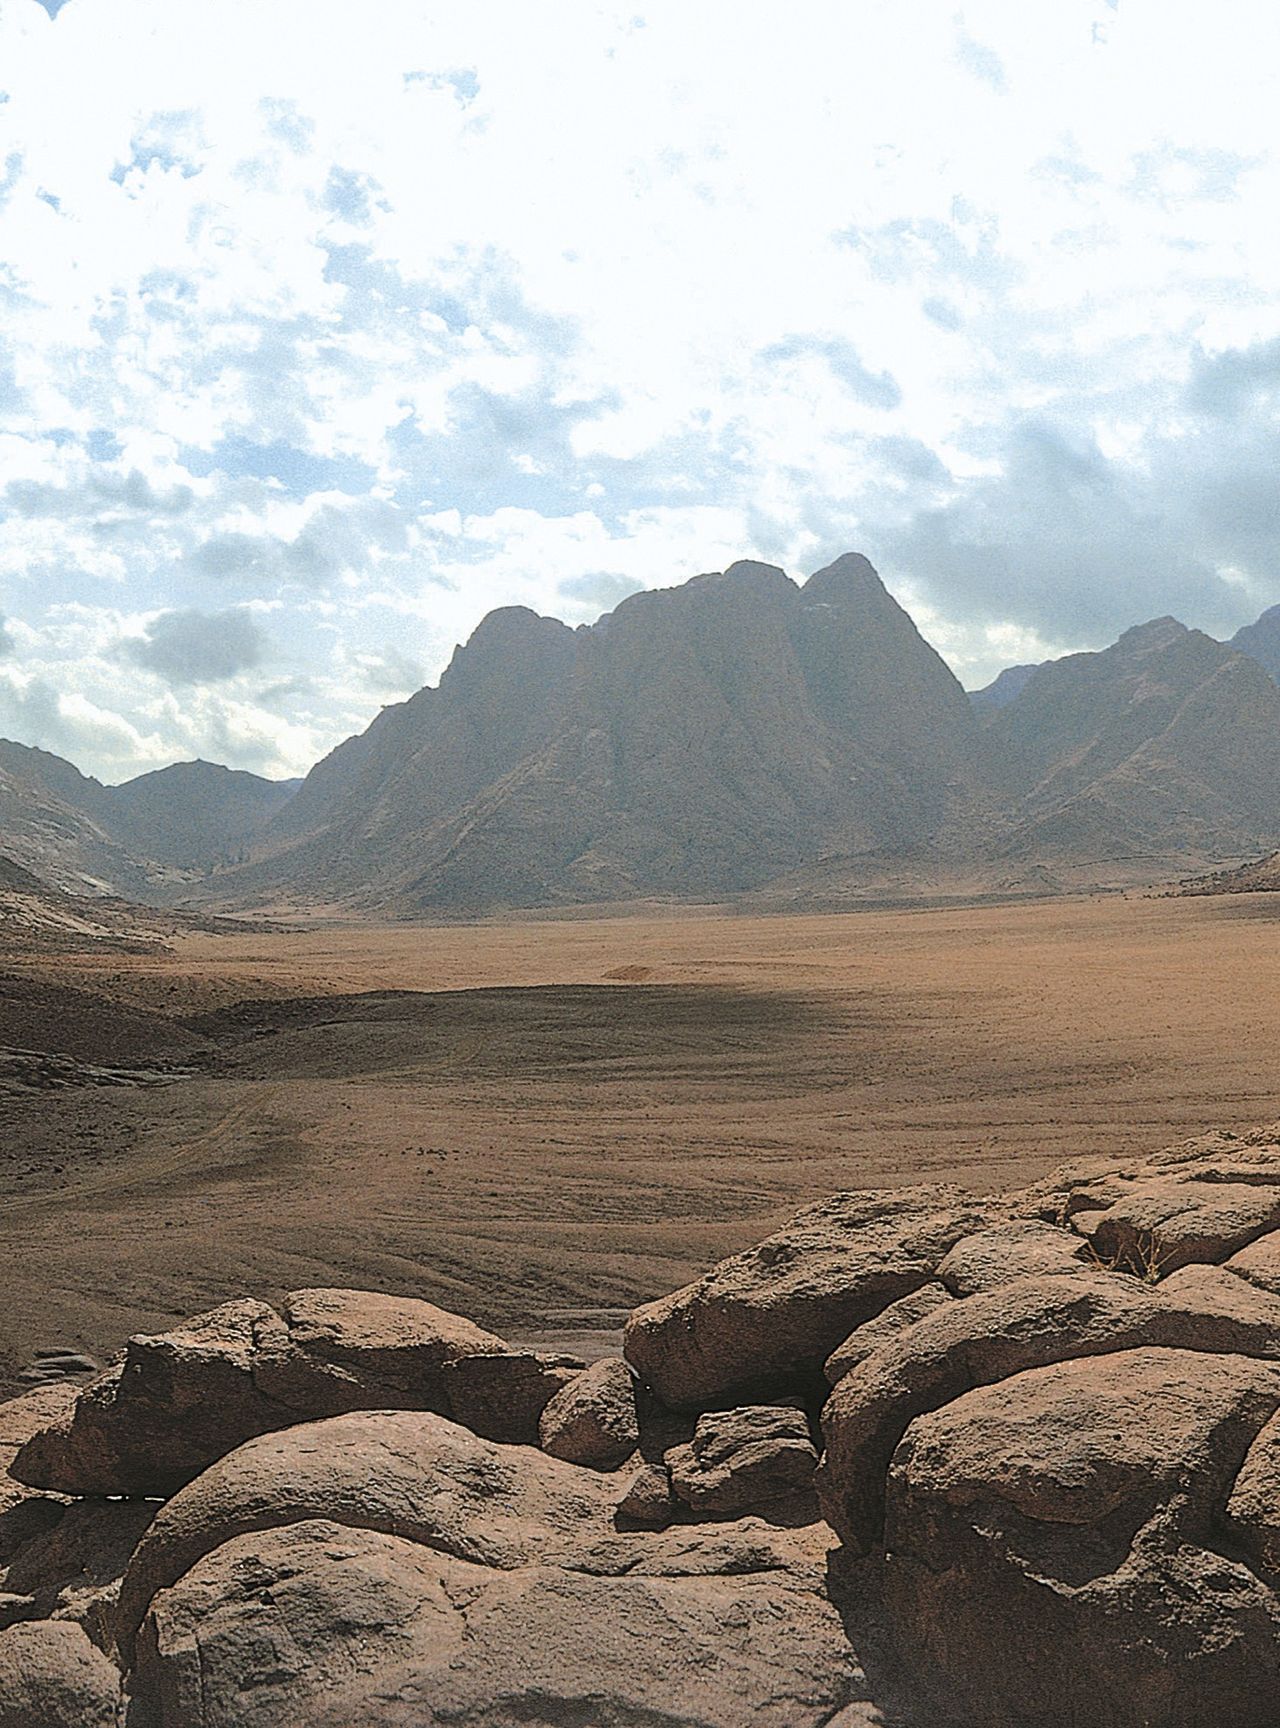 The plain of Rahah with Mount Sinai in the background.